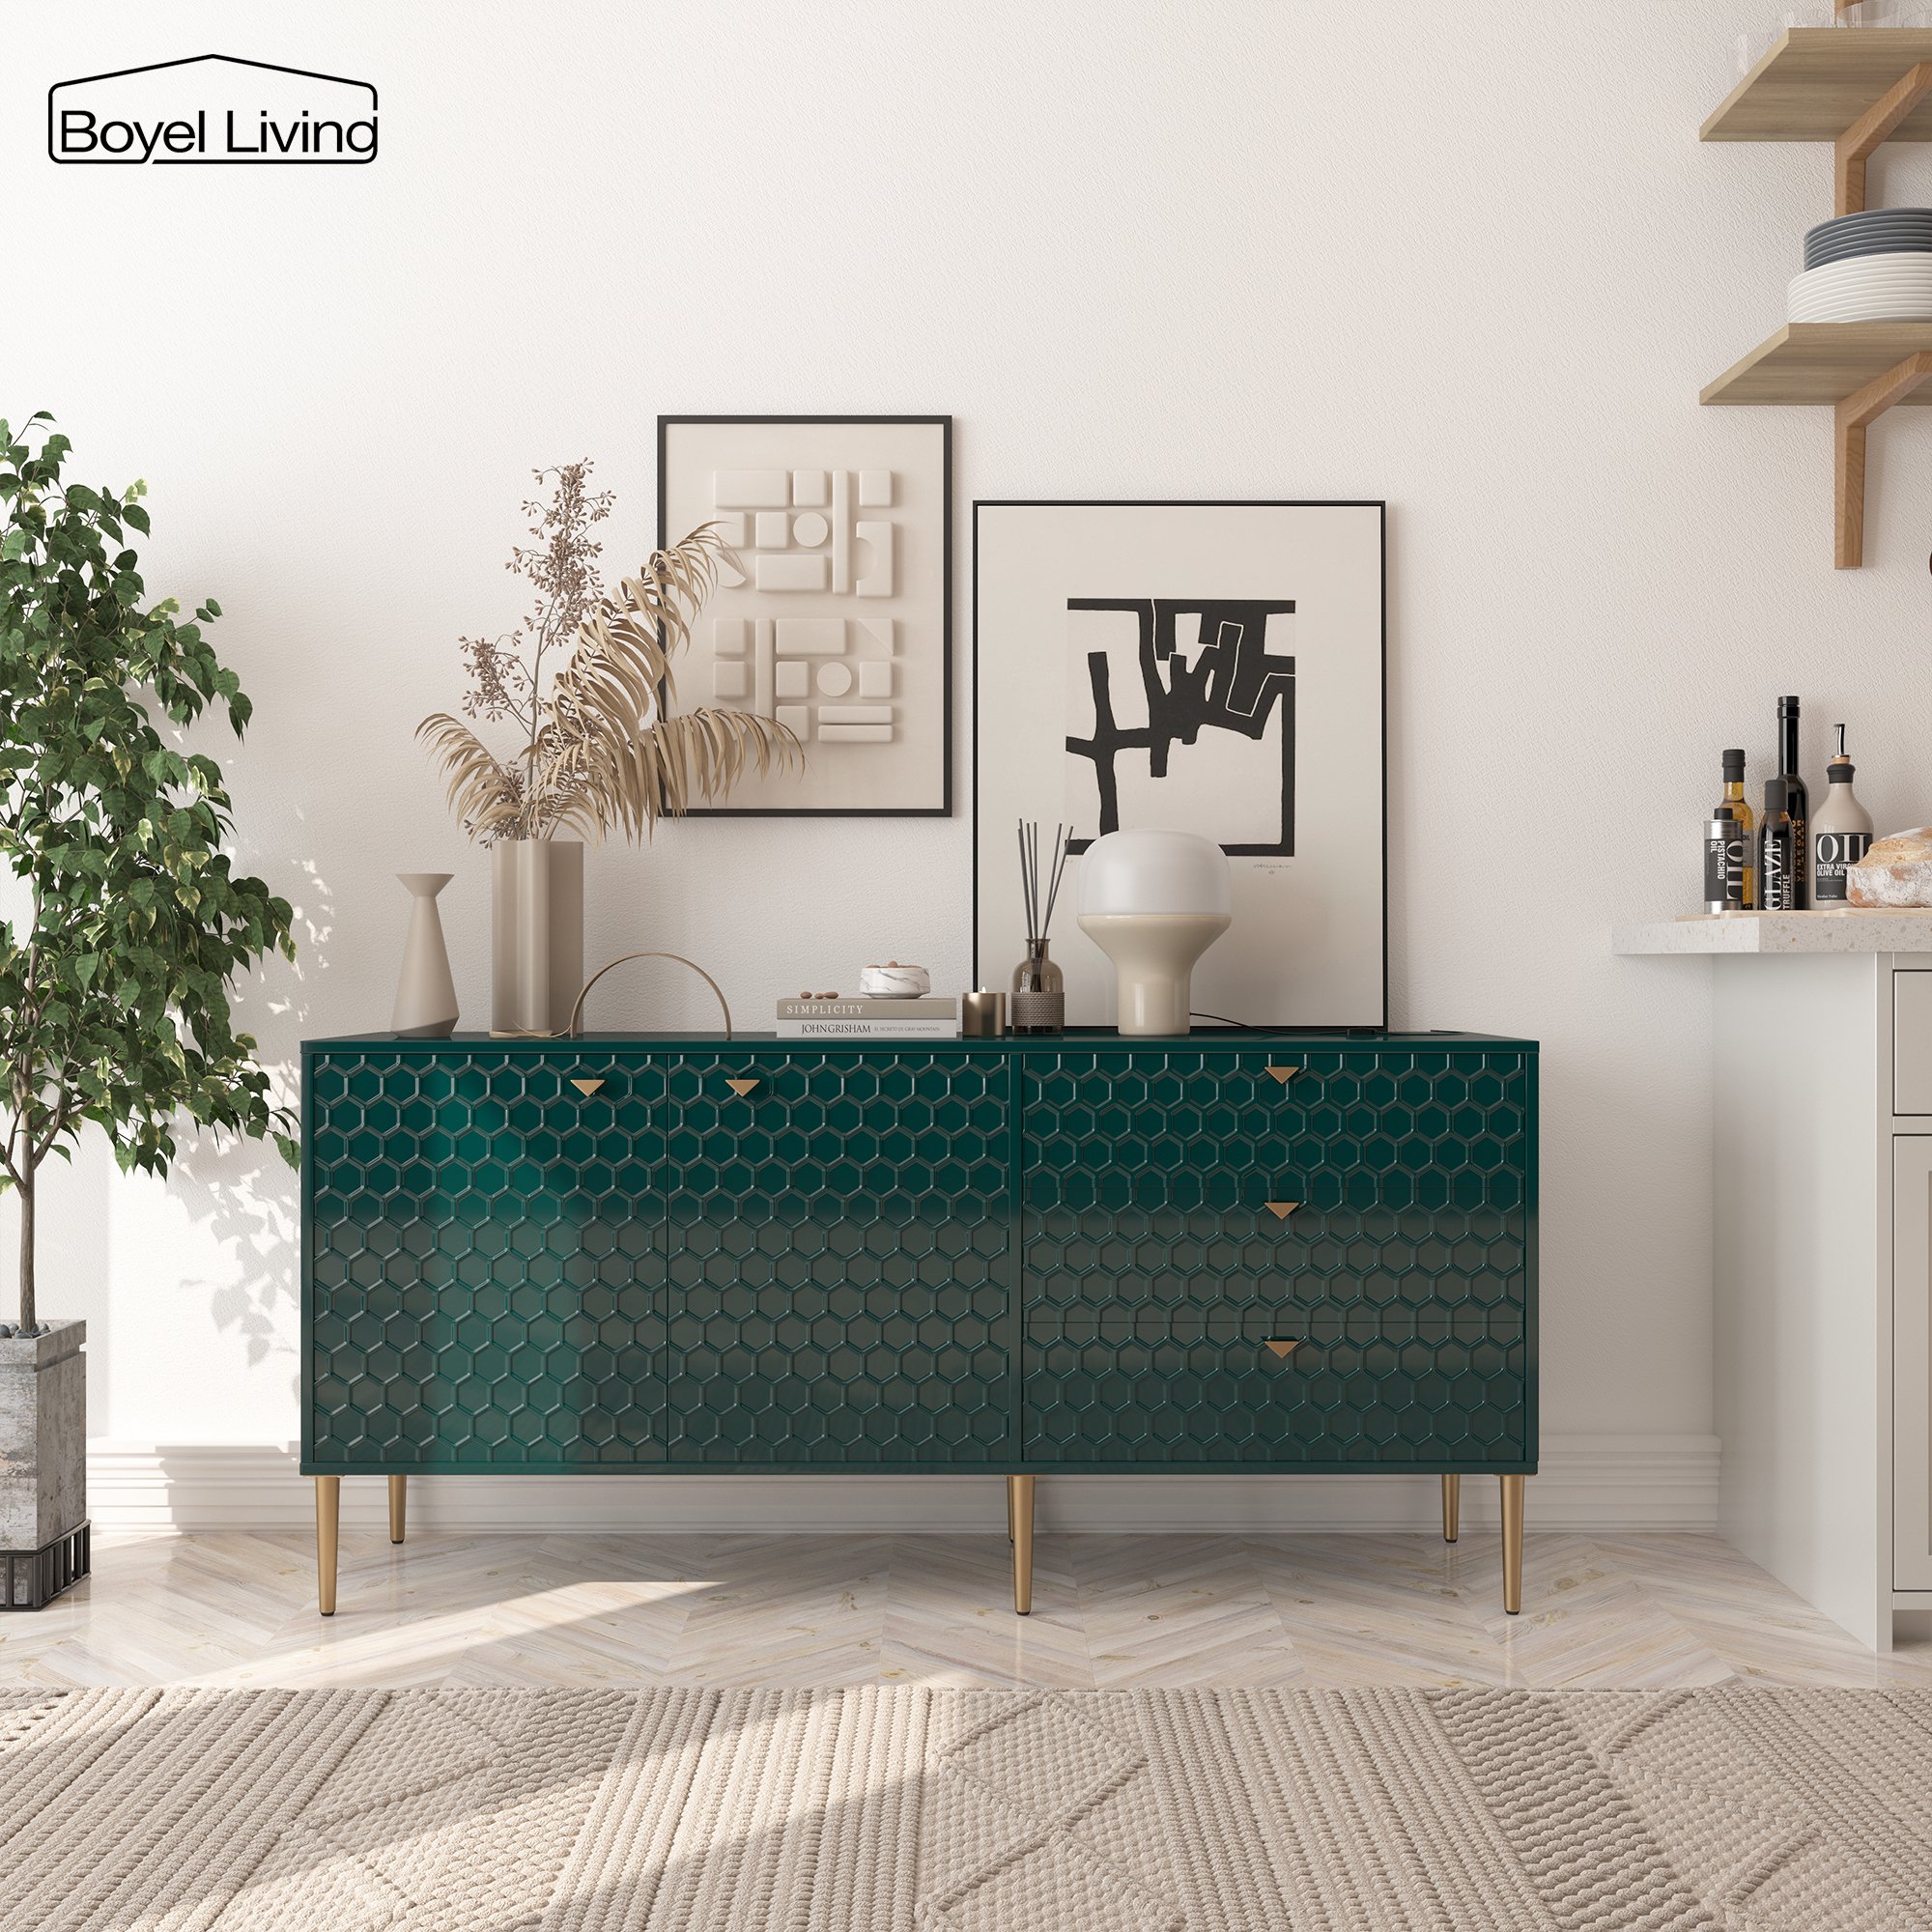 Boyel Living 2 Door Storage and 3 Drawers Three-dimensional Honeycomb Pattern TV Stands Cabinet MDF Sideboard